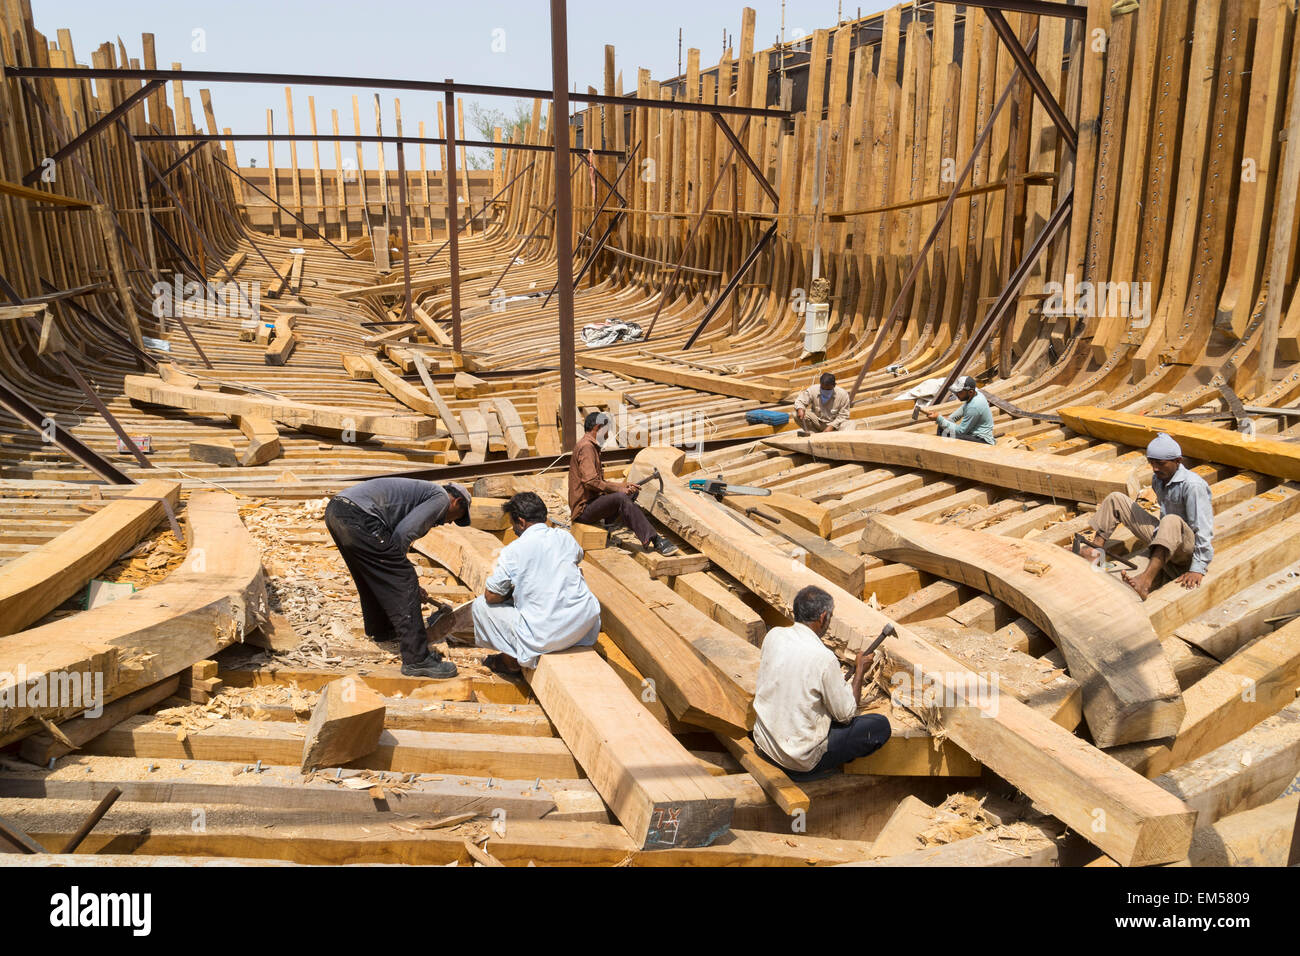 Craftsmen building a traditional wooden dhow cargo ship in ...